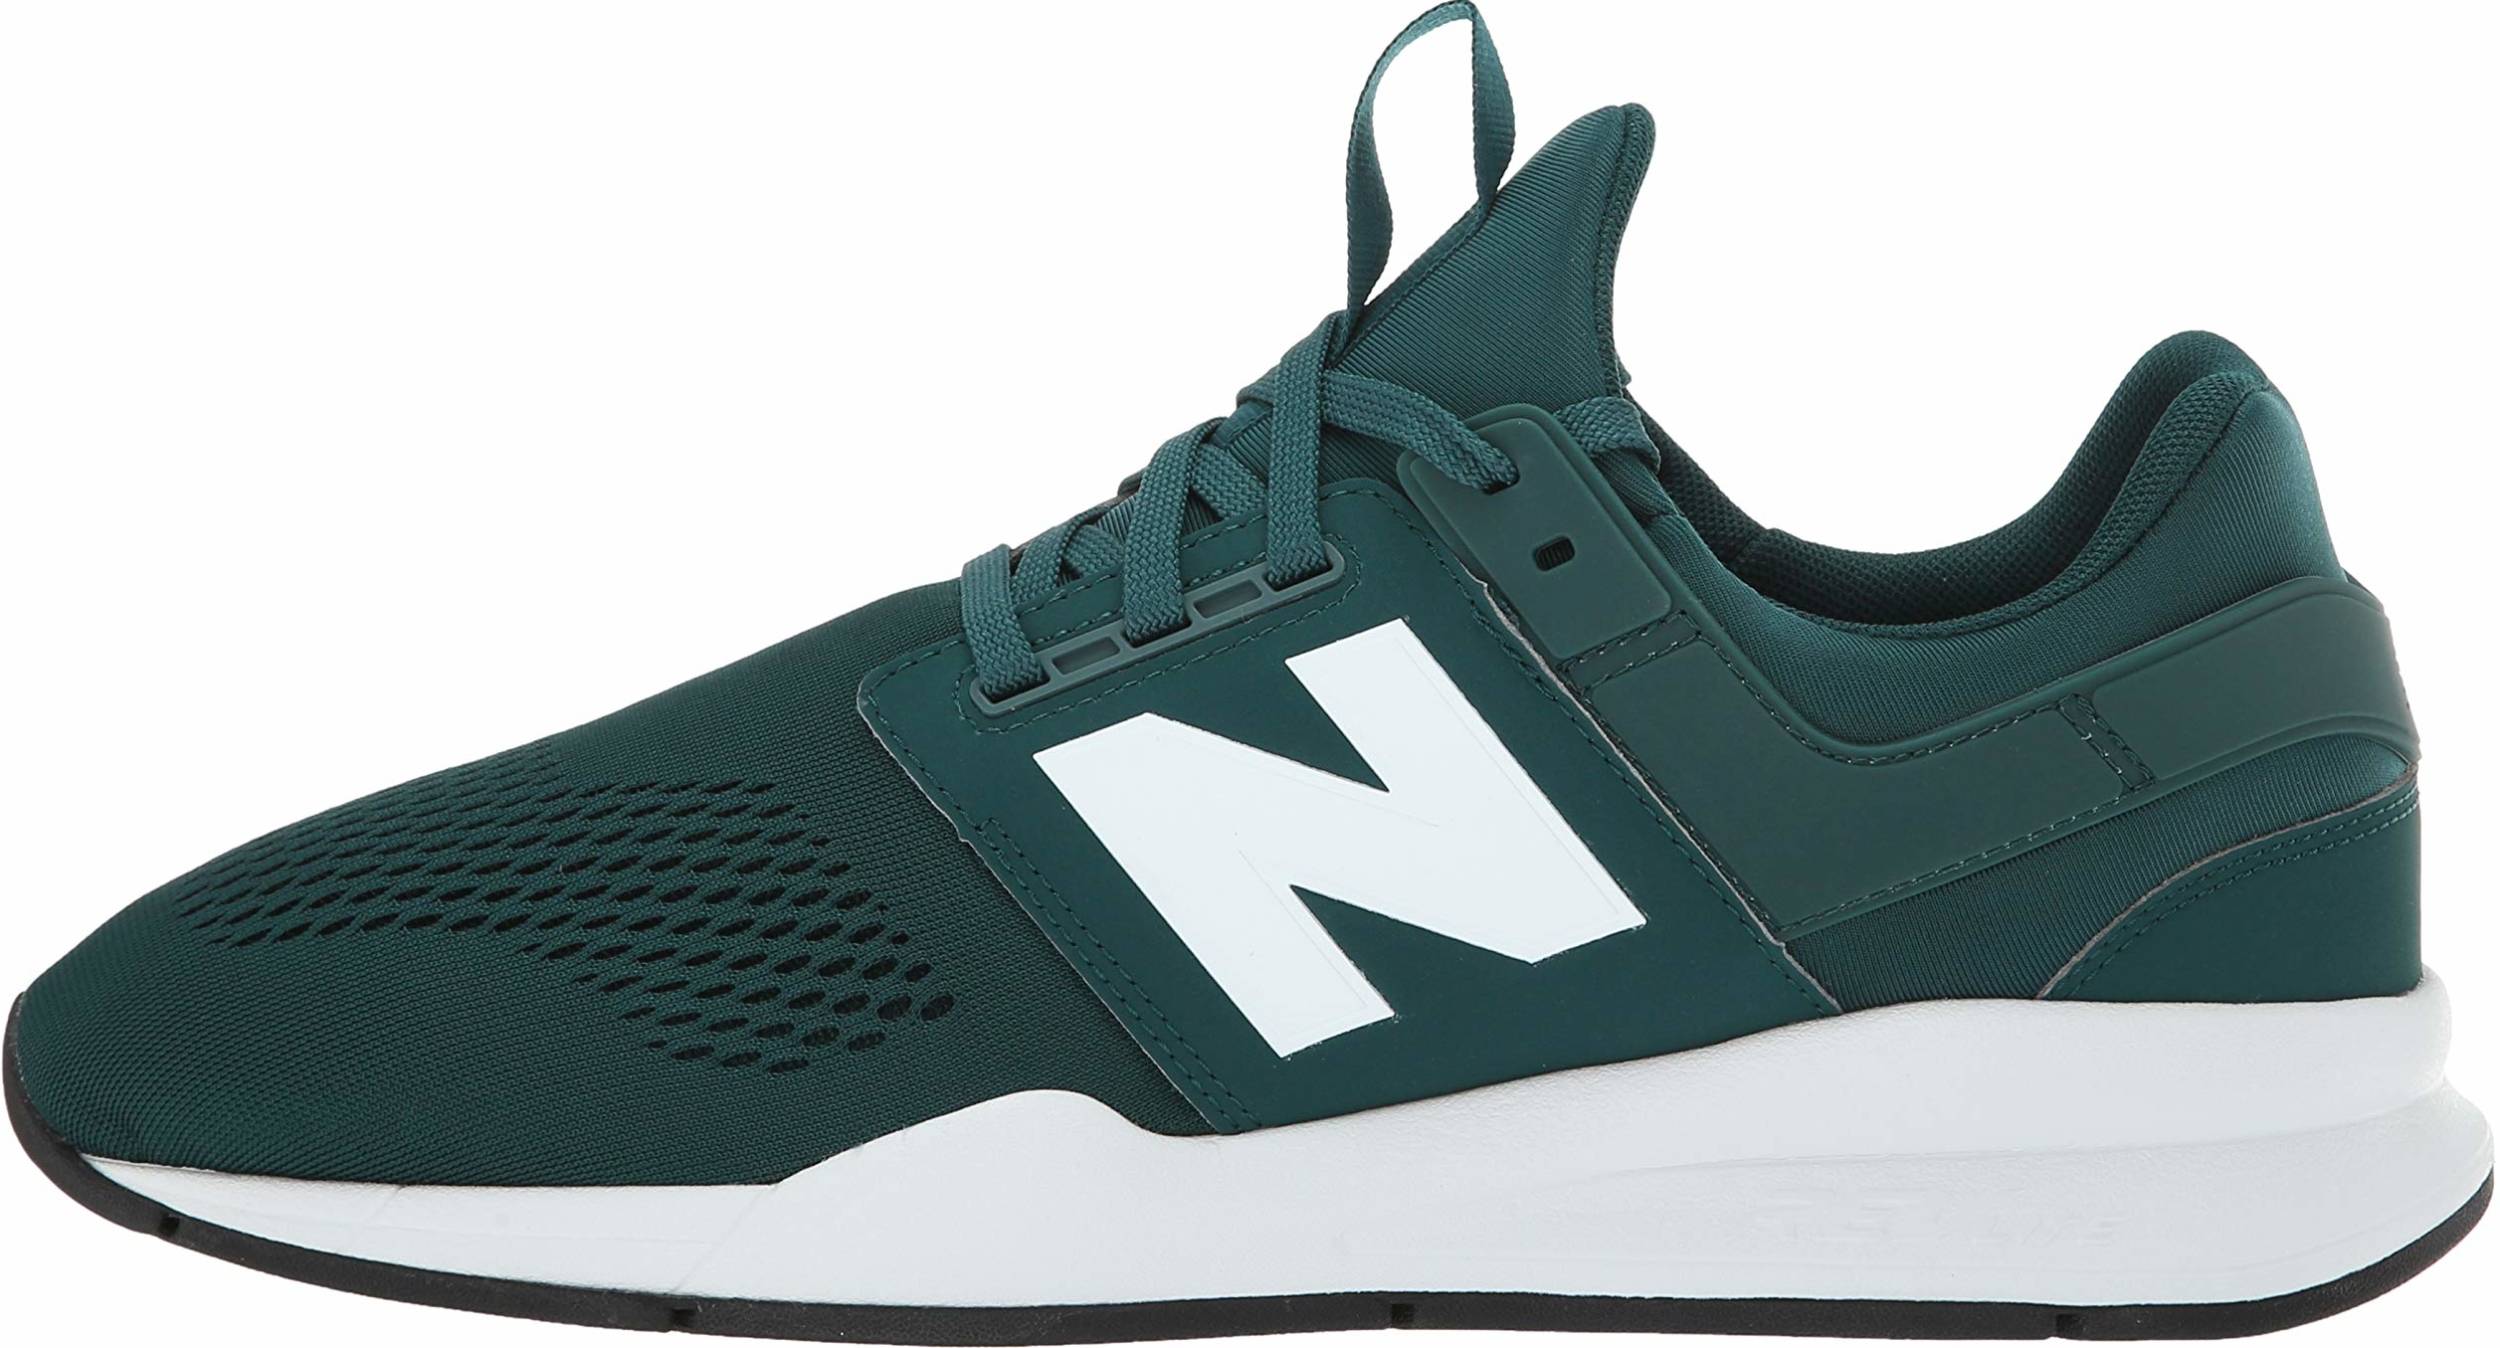 New Balance 247 v2 sneakers in 10 colors (only $42) | RunRepeat